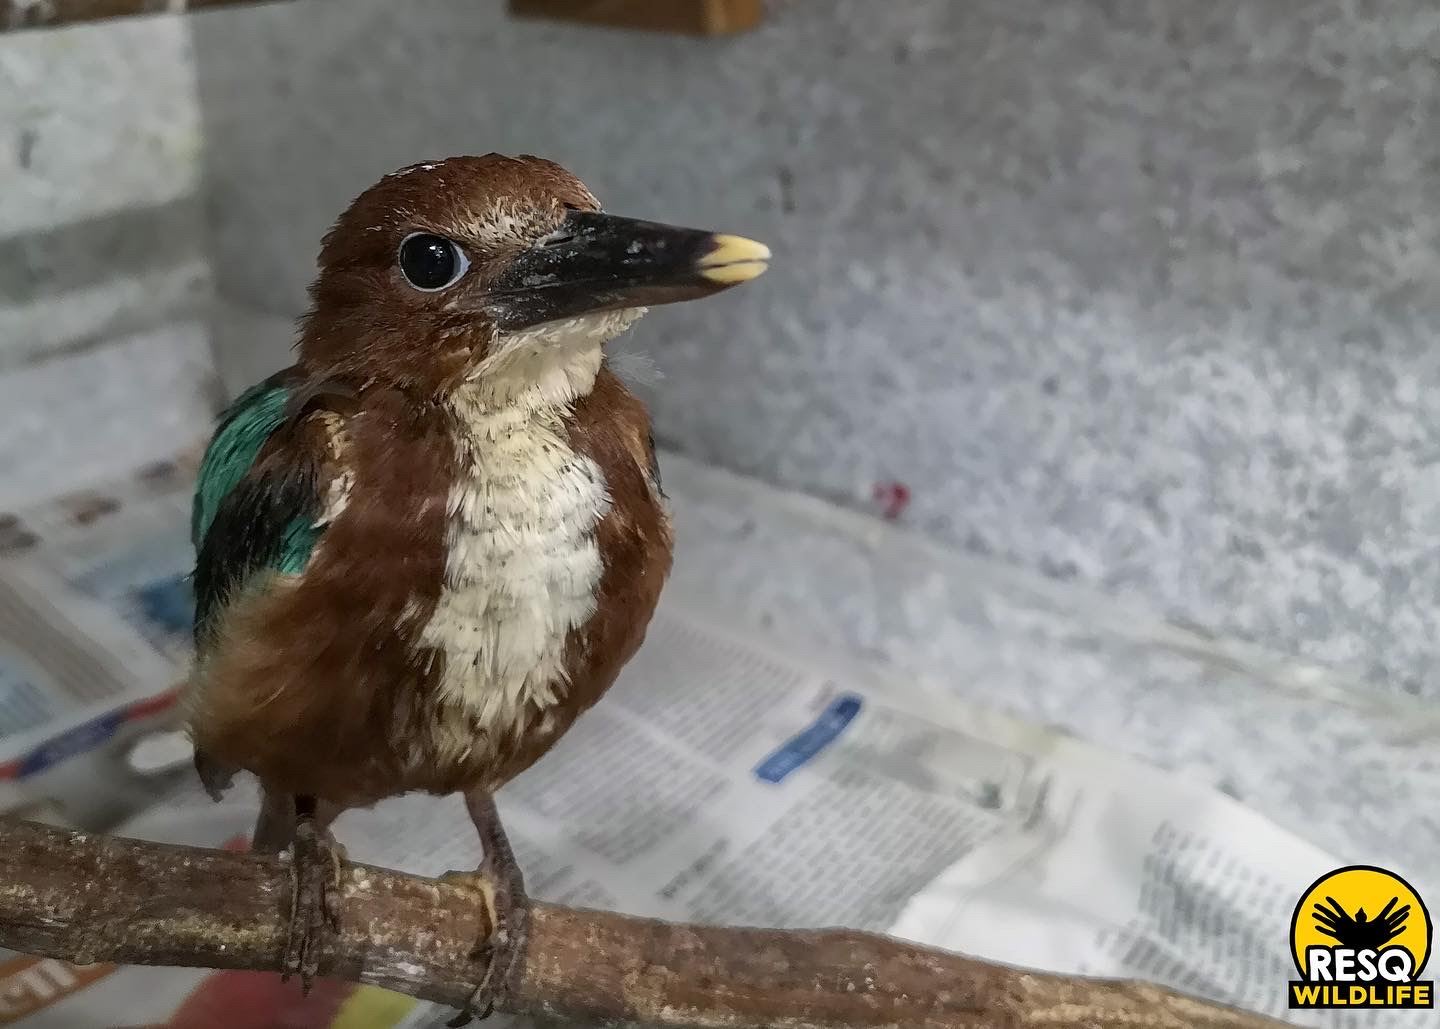 White-throated Kingfisher fledging under under going the RESQ Oprhan Rehab program. This was the first time the bird perched which is always an encouraging sign.